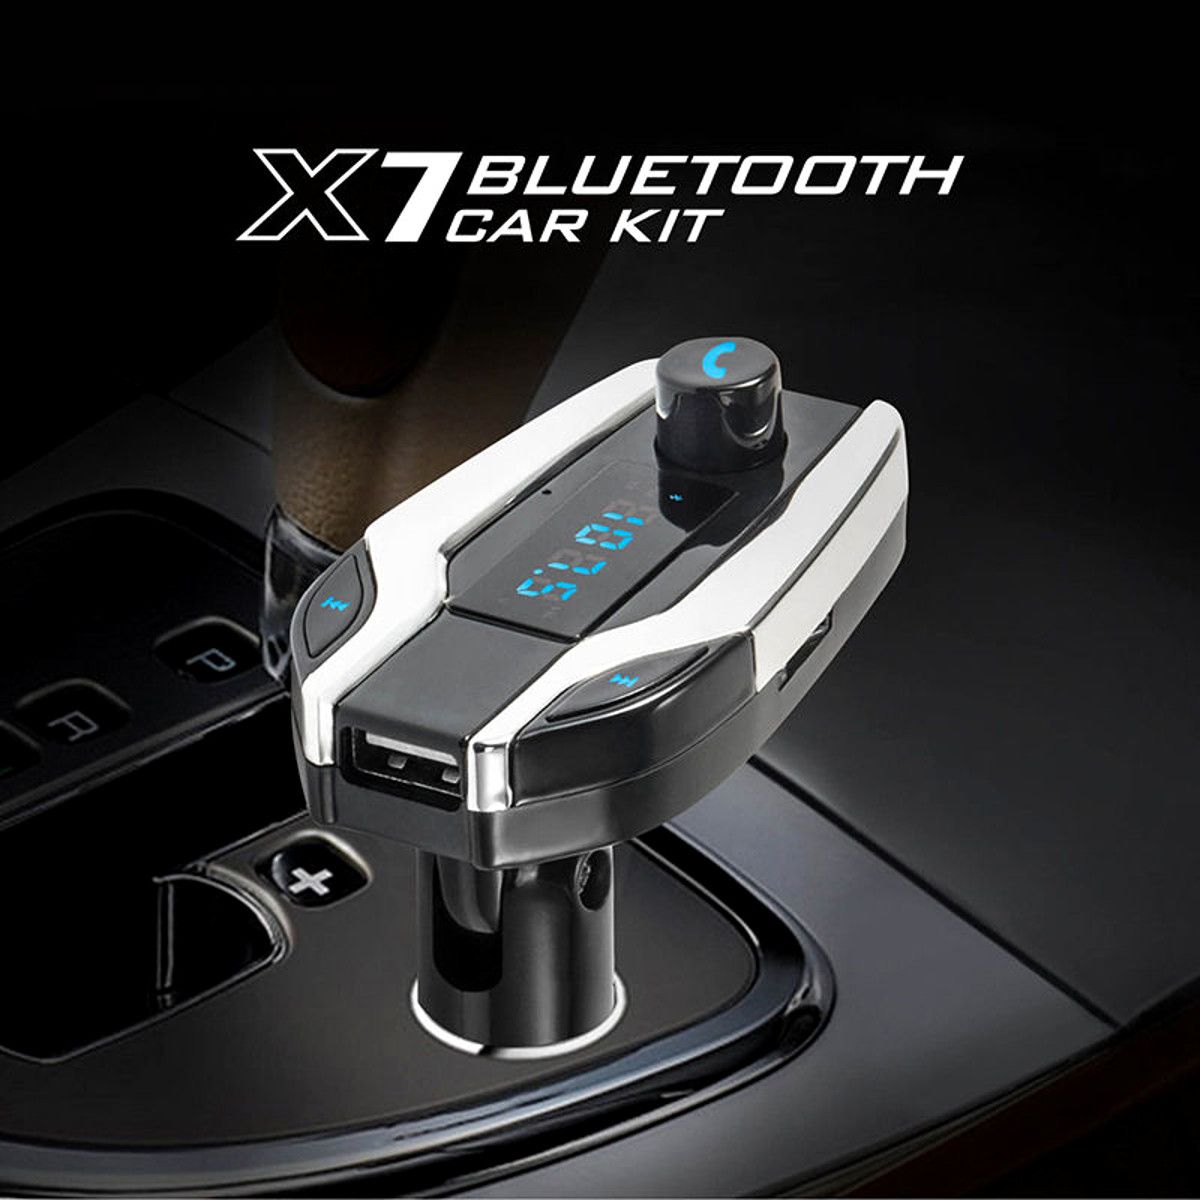 X7-Wireless-bluetooth-Car-Kit-MP3-Player-FM-Transmitter-SD-USB-Charger-for-Phone-1166206